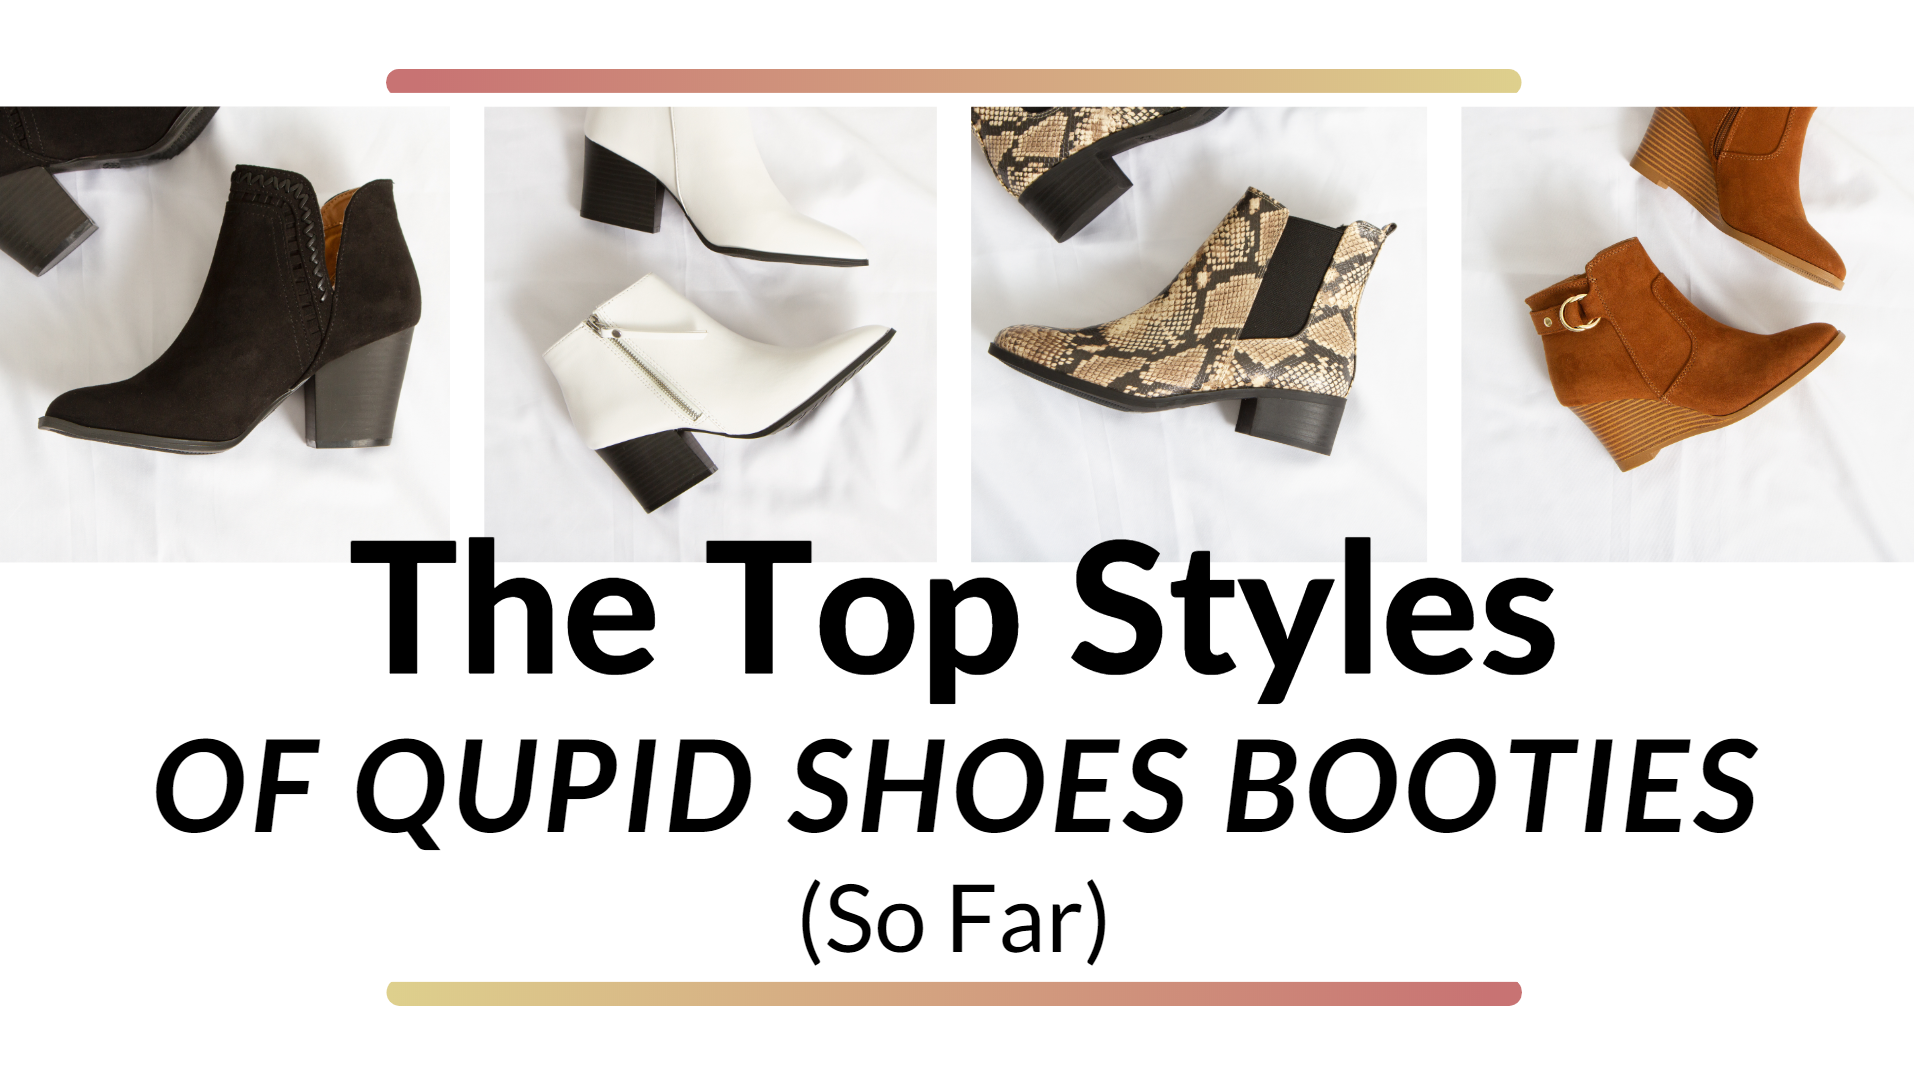 The Top Styles of Qupid Shoes Ankle Booties (So Far) – Glik's